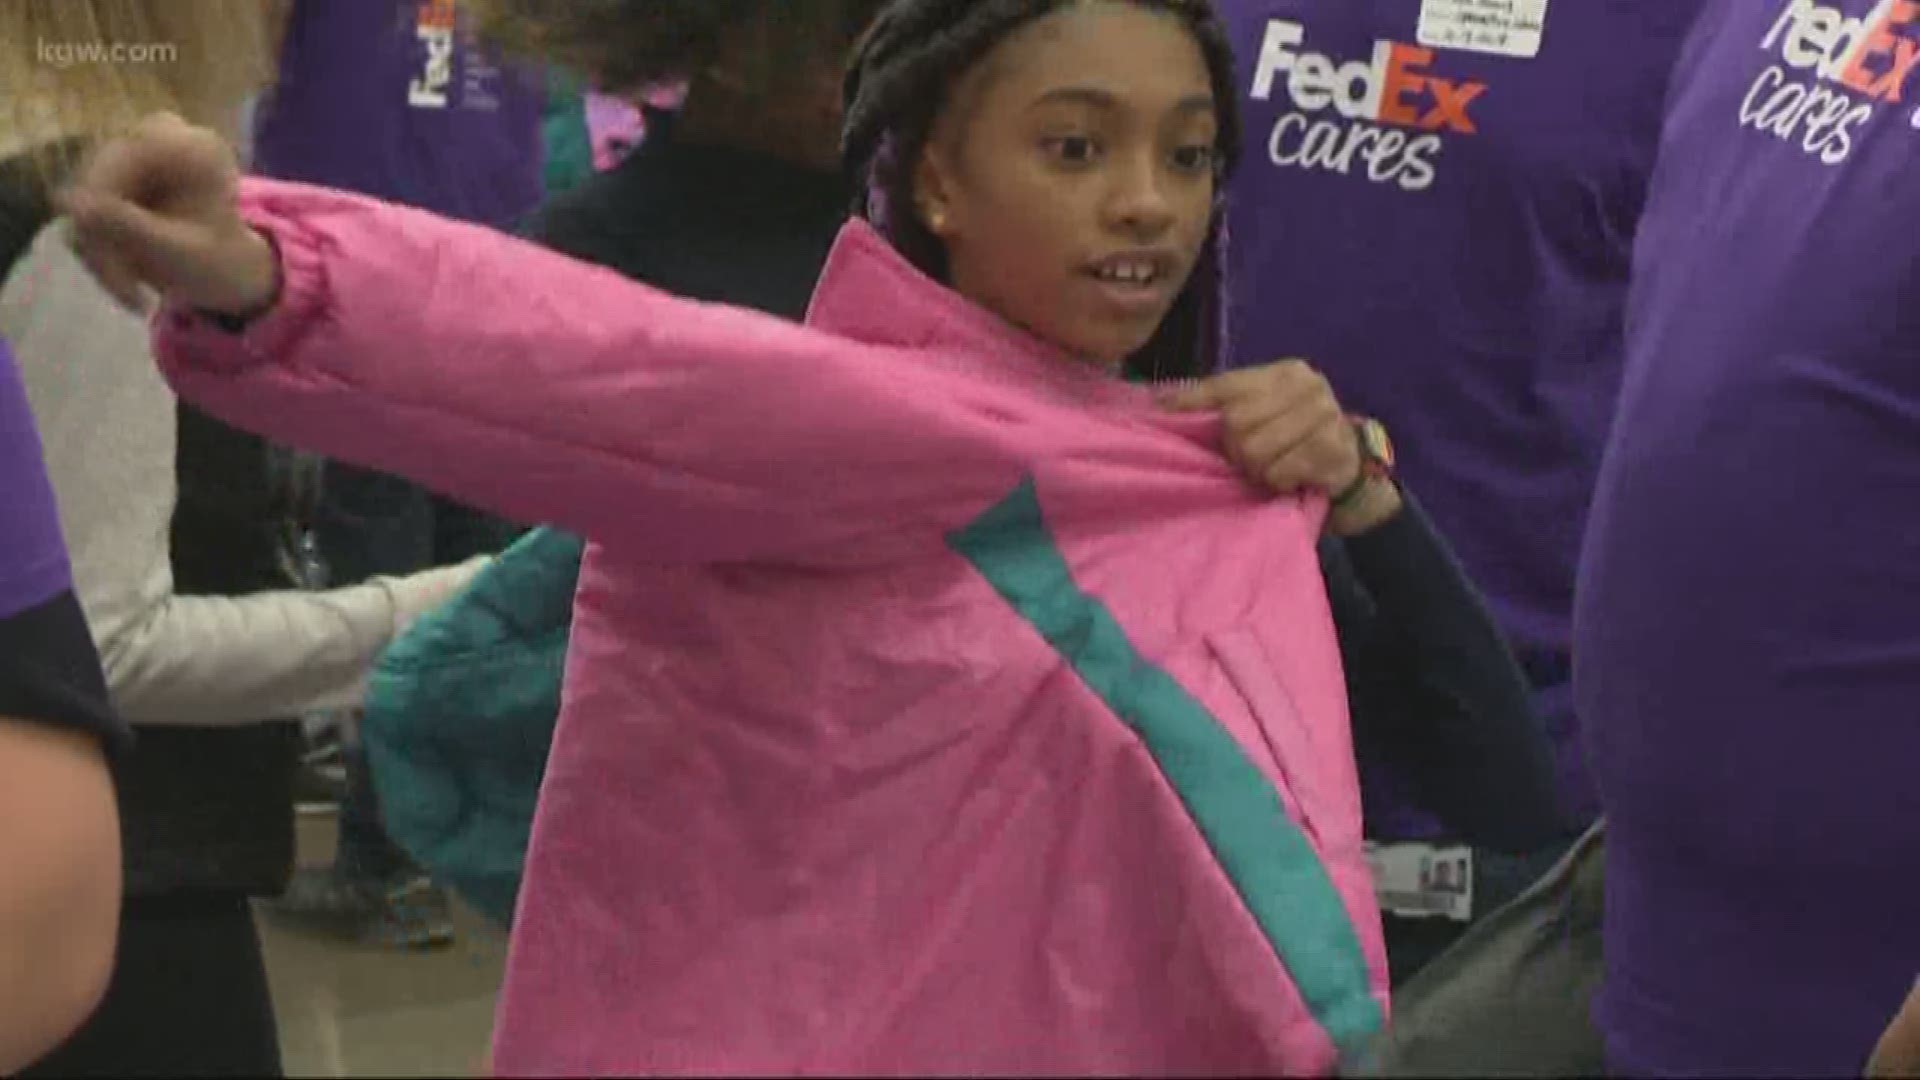 'Operation Warm' delivered coats Tuesday to students at Rosa Parks Elementary School.